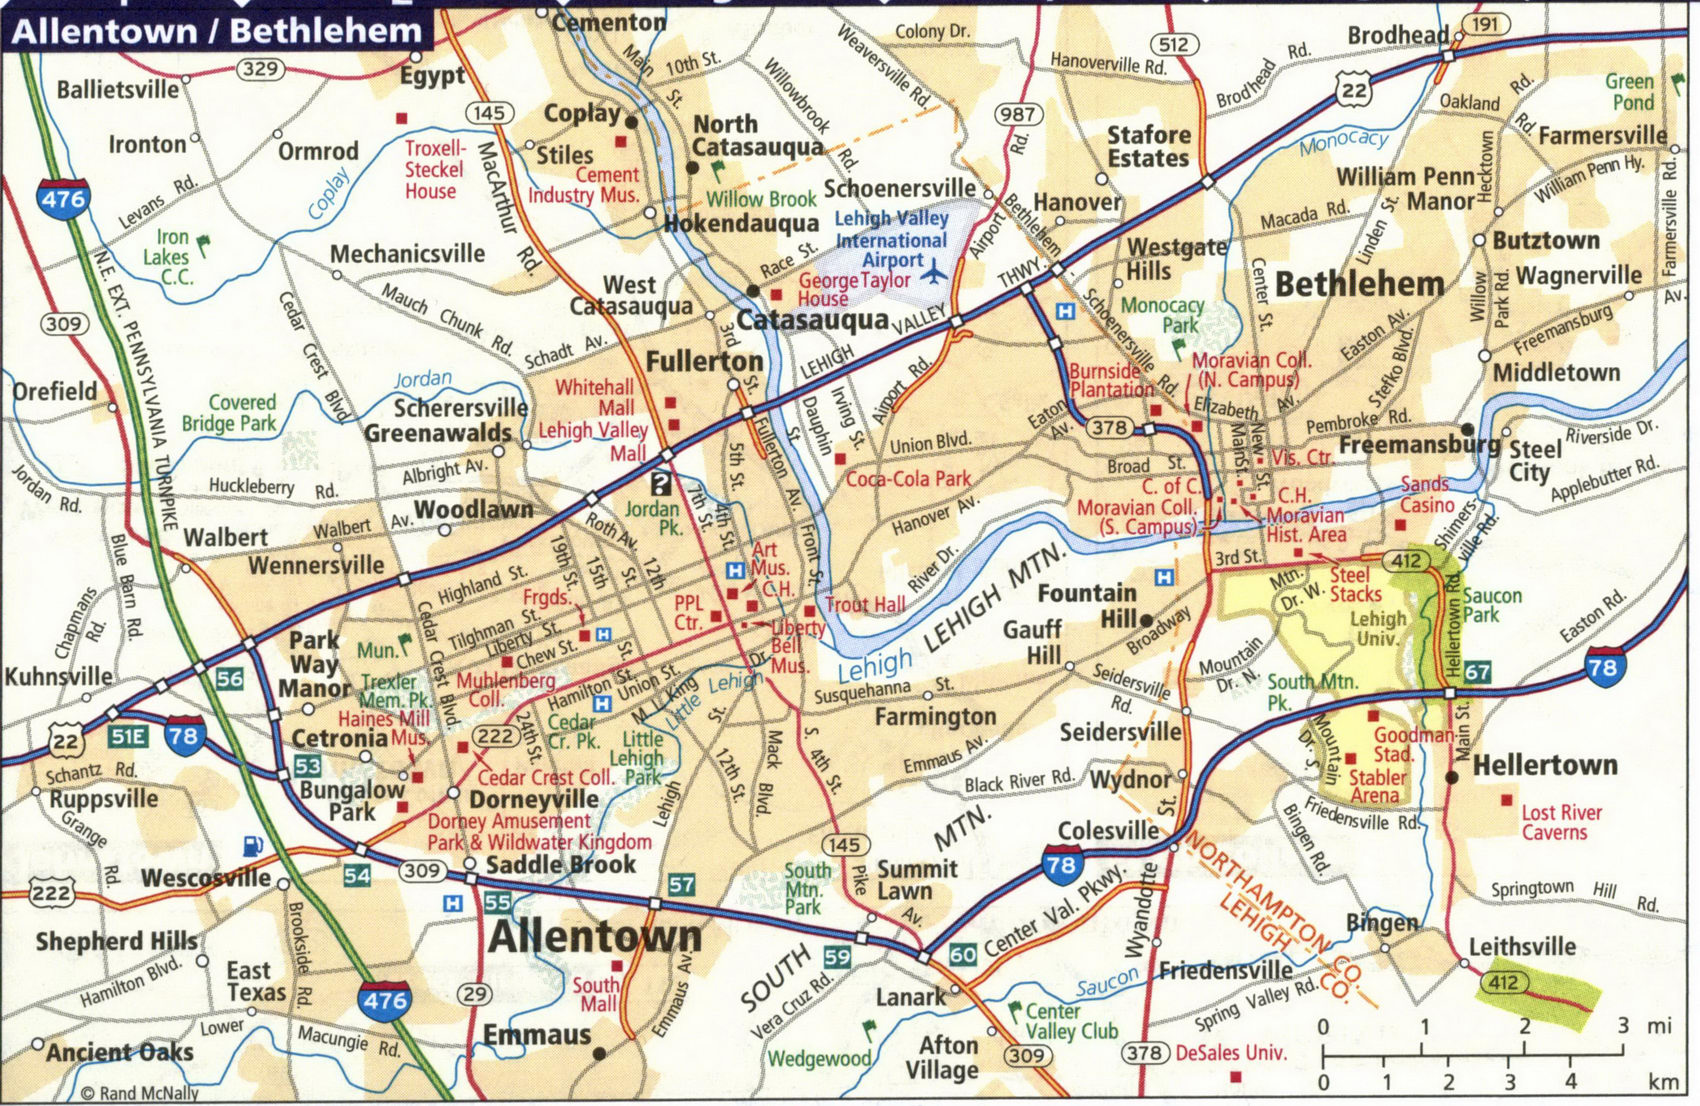 Map of Allentown and Bethlehem